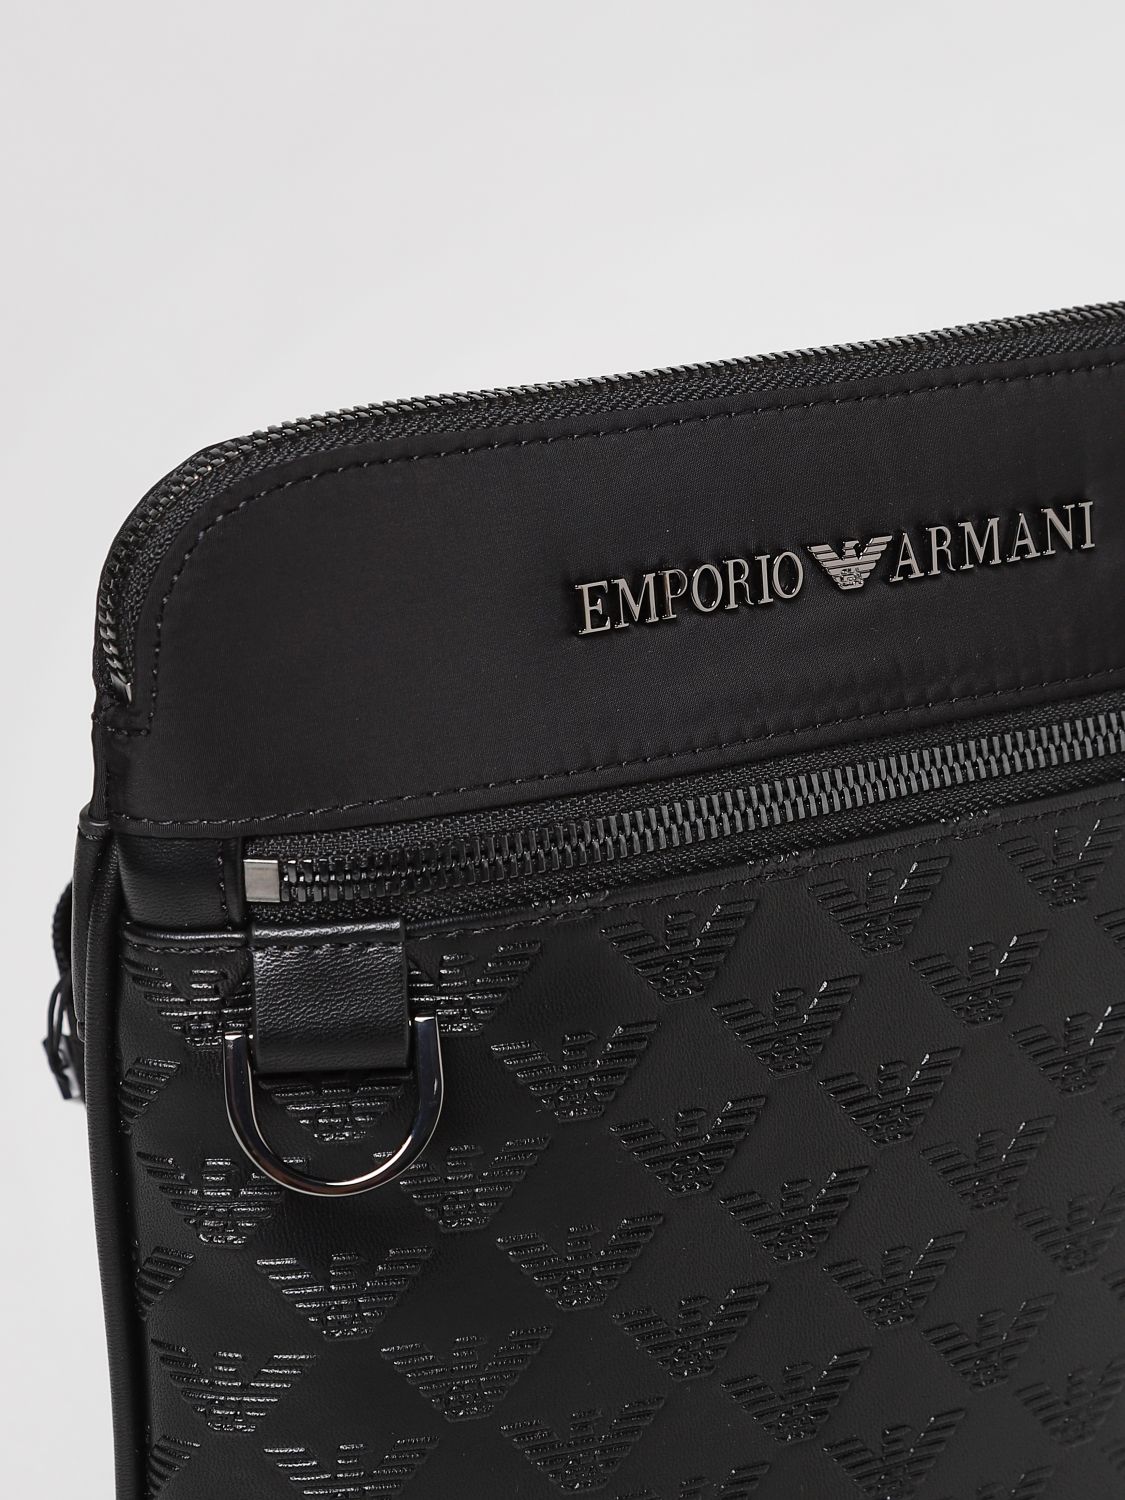 EMPORIO ARMANI: flat shoulder bag in recycled nylon - Black  Emporio Armani  shoulder bag Y4M185Y217J online at